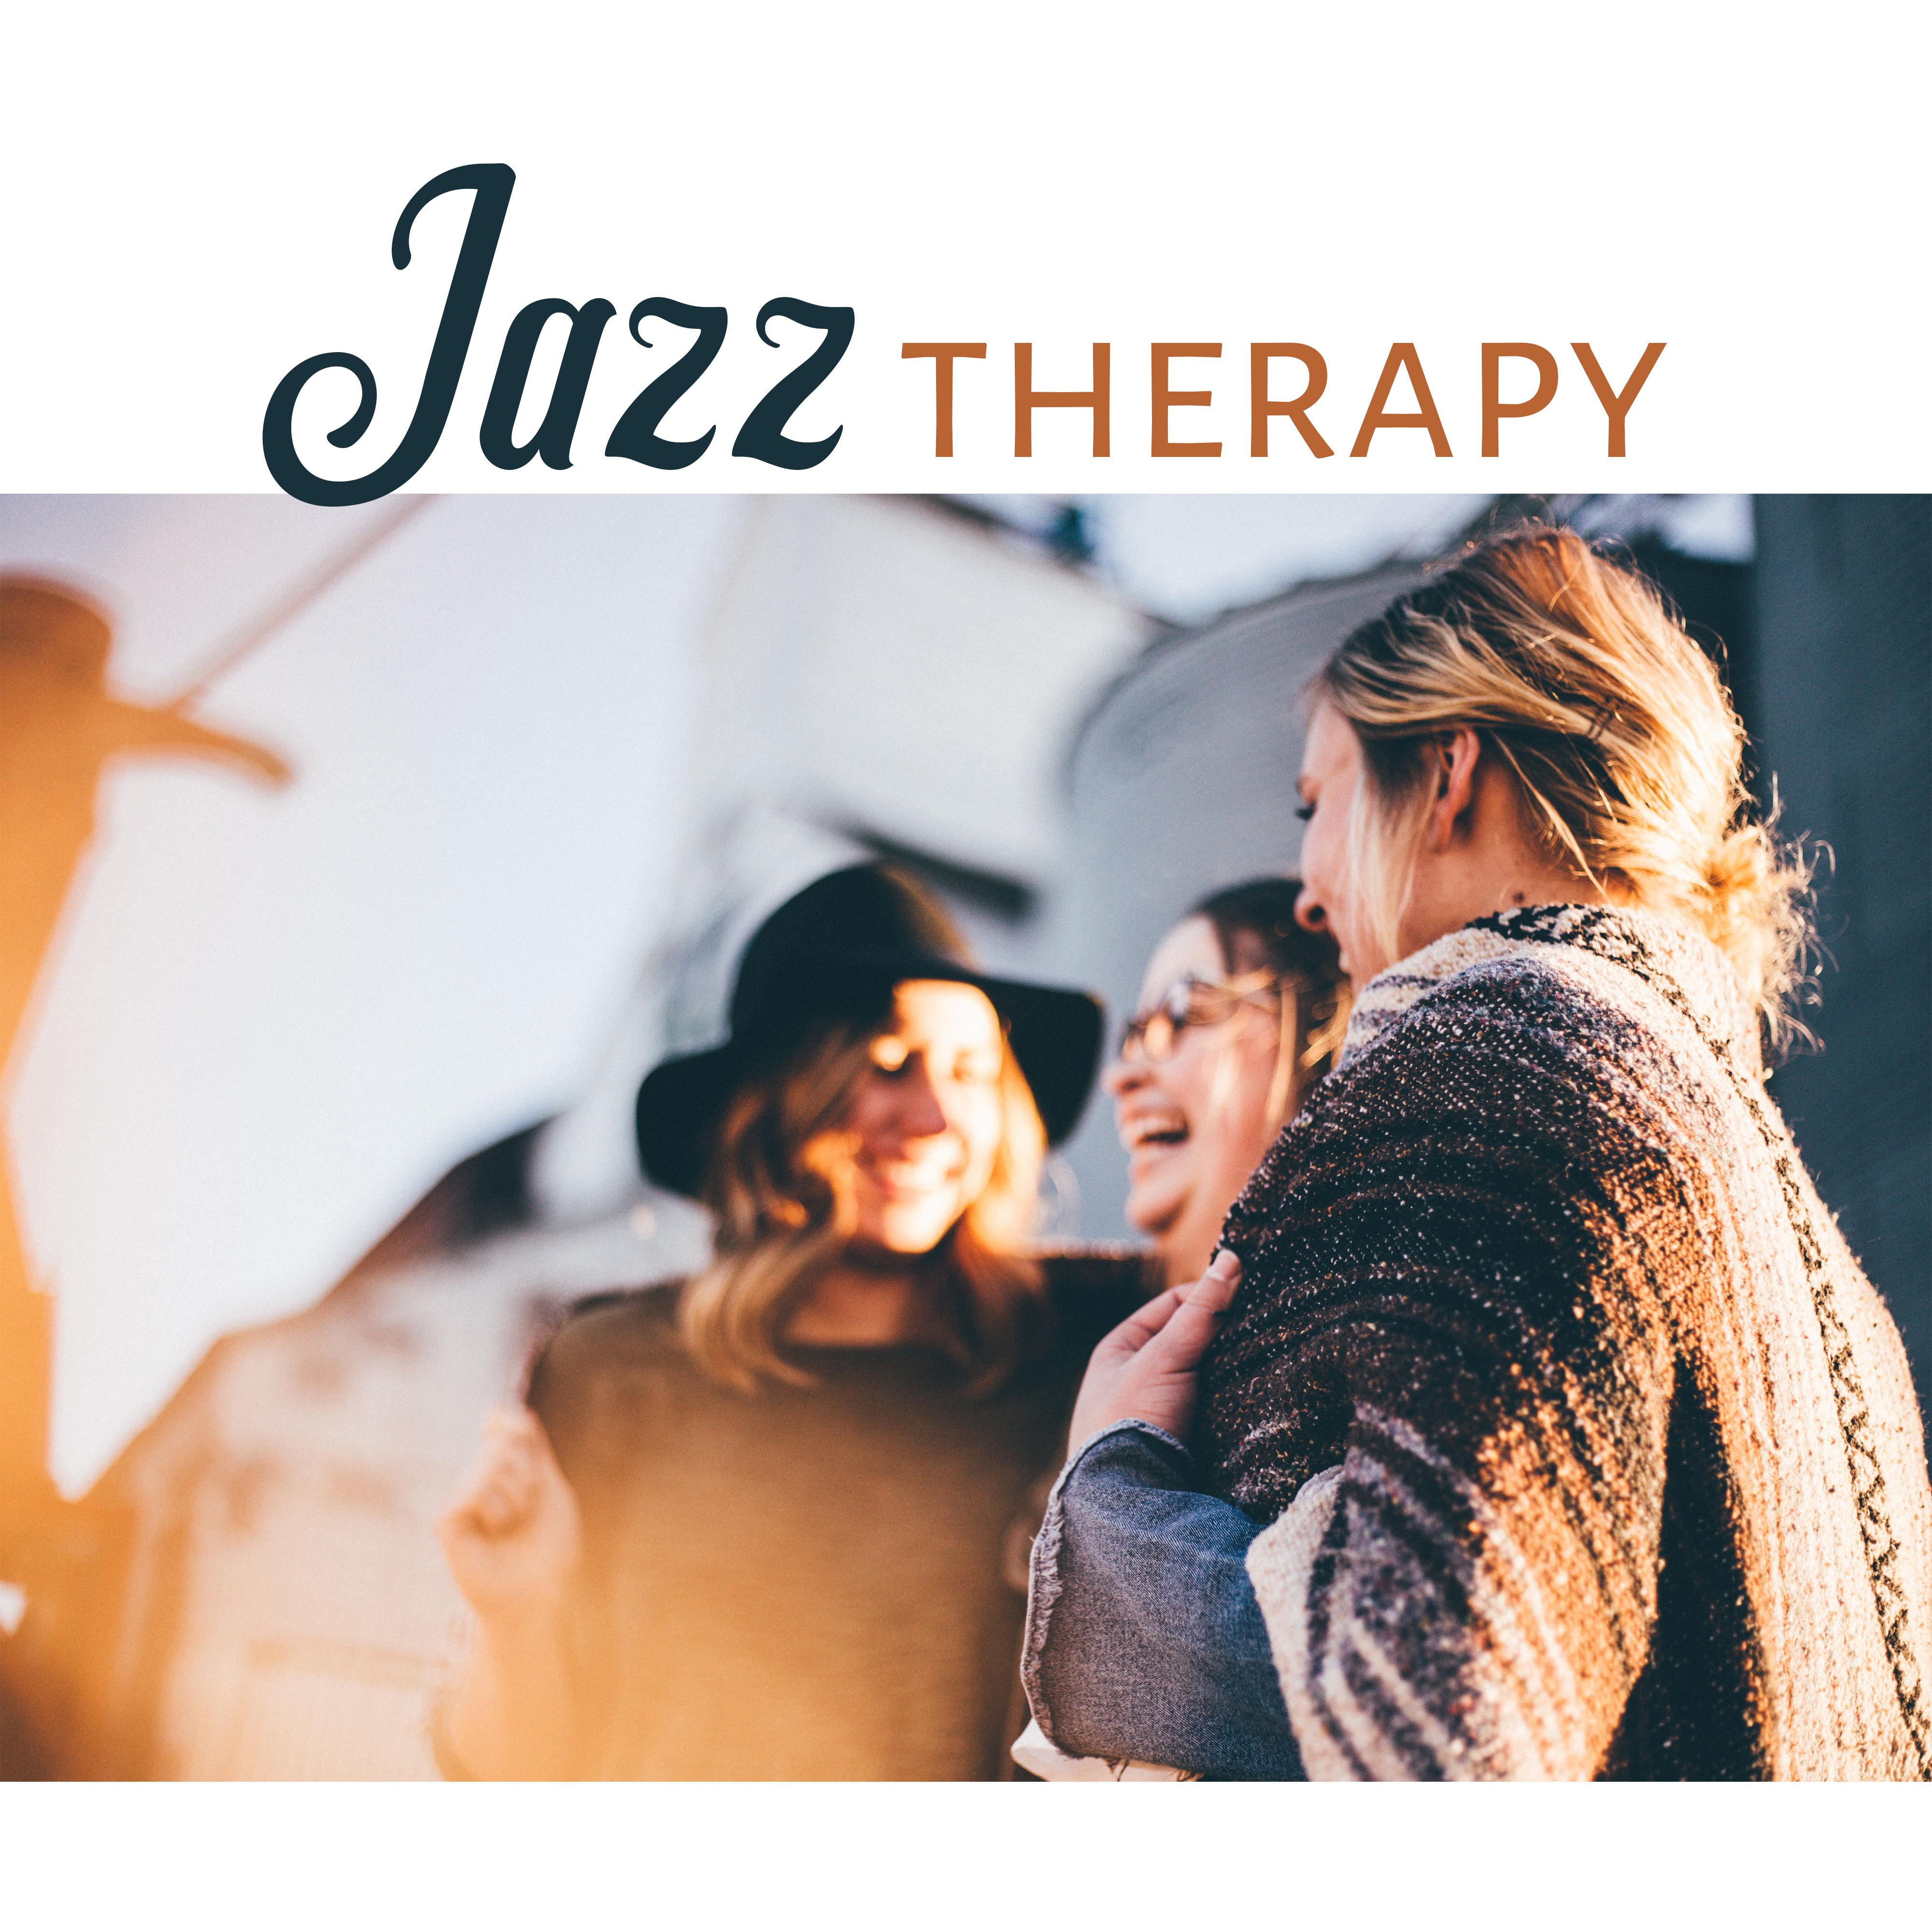 Jazz Therapy – Soothing Sounds for Relaxation, Healing, Chilled Jazz, Peaceful Mind, Soothing Guitar, Delicate Piano, Smooth Jazz at Night